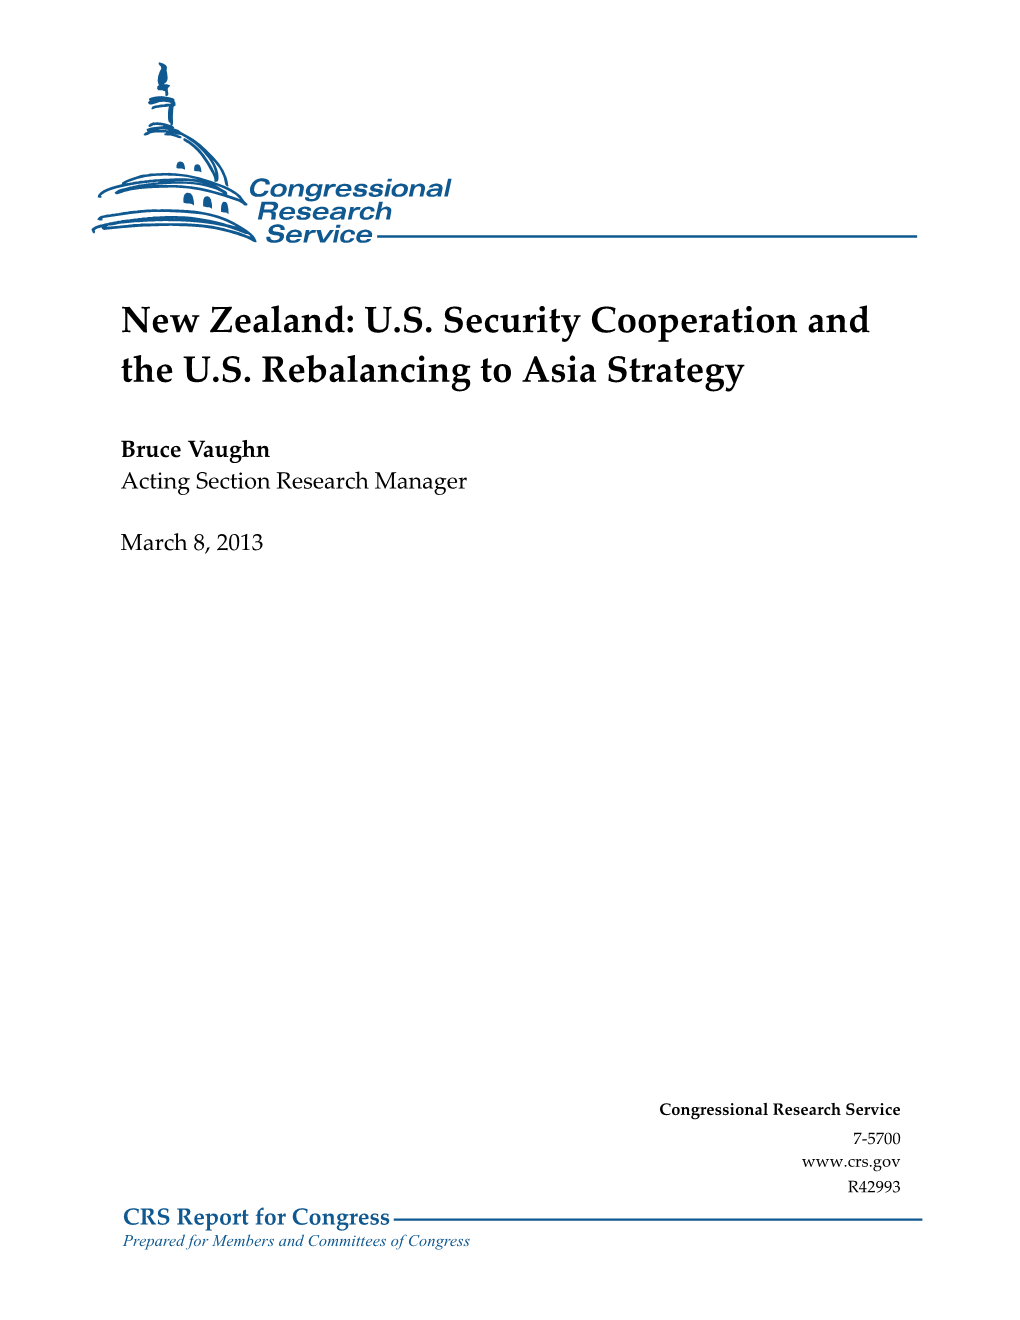 New Zealand: U.S. Security Cooperation and the U.S. Rebalancing to Asia Strategy